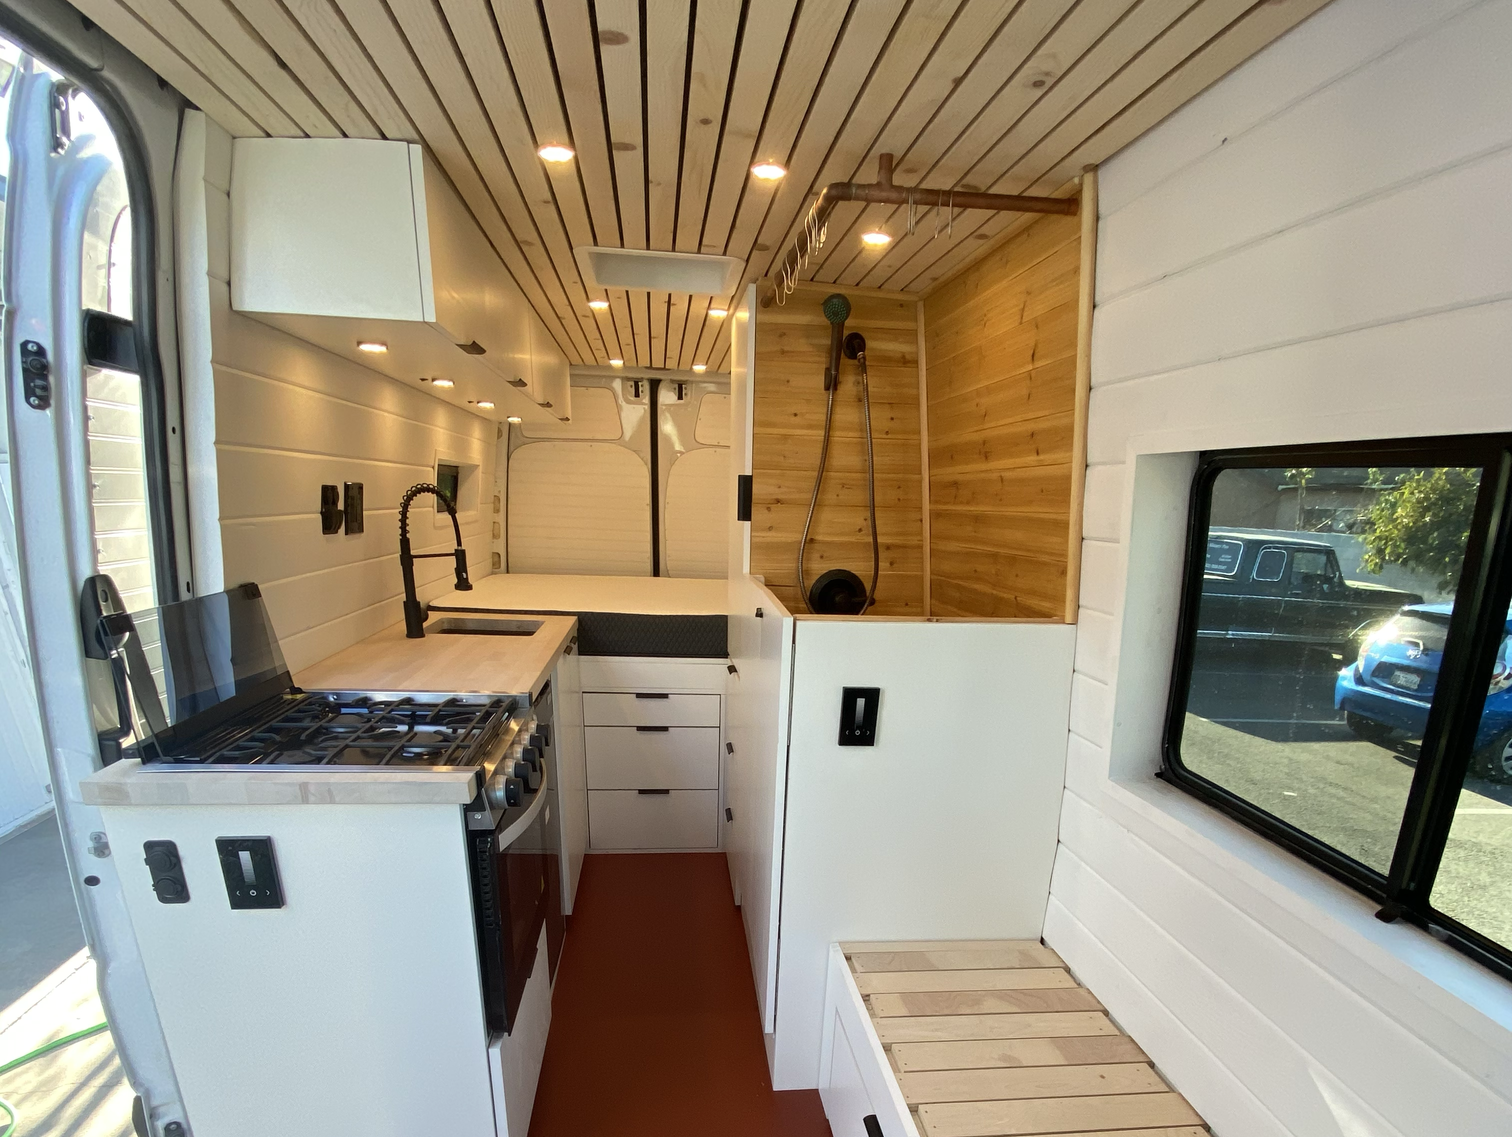 The interior of a white van with a kitchen, bench, bed and shower.